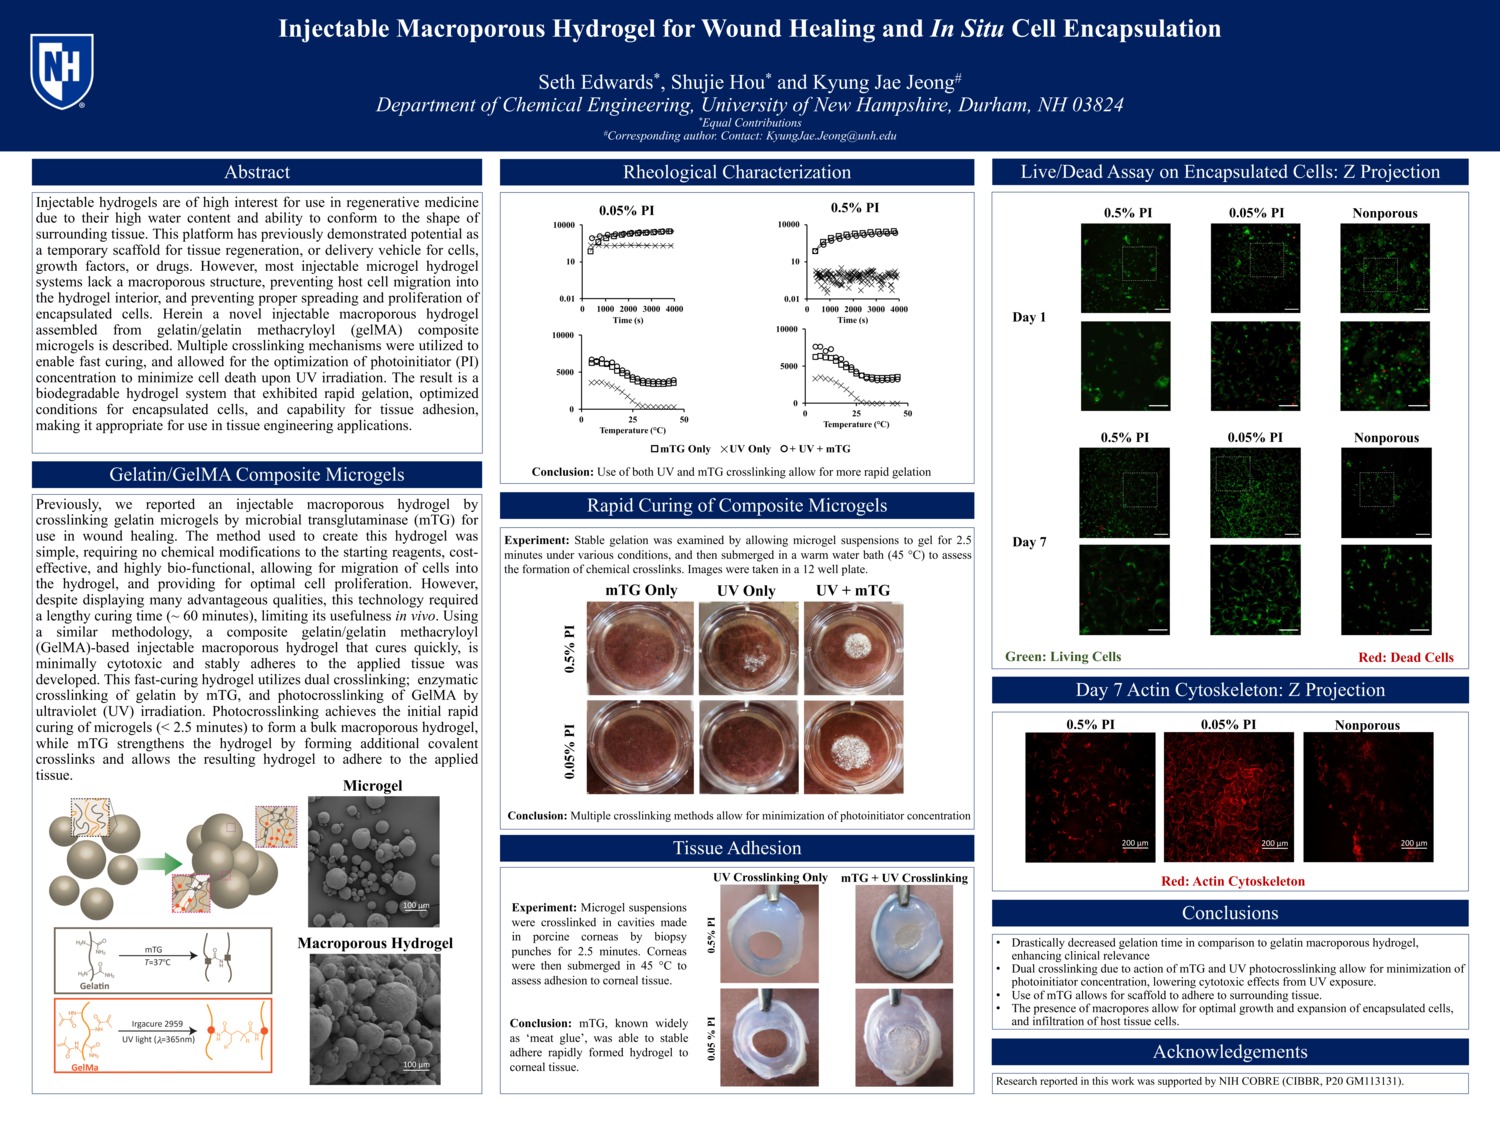 Injectable Macroporous Hydrogel For Wound Healing And In Situ Cell Encapsulation by sde2001